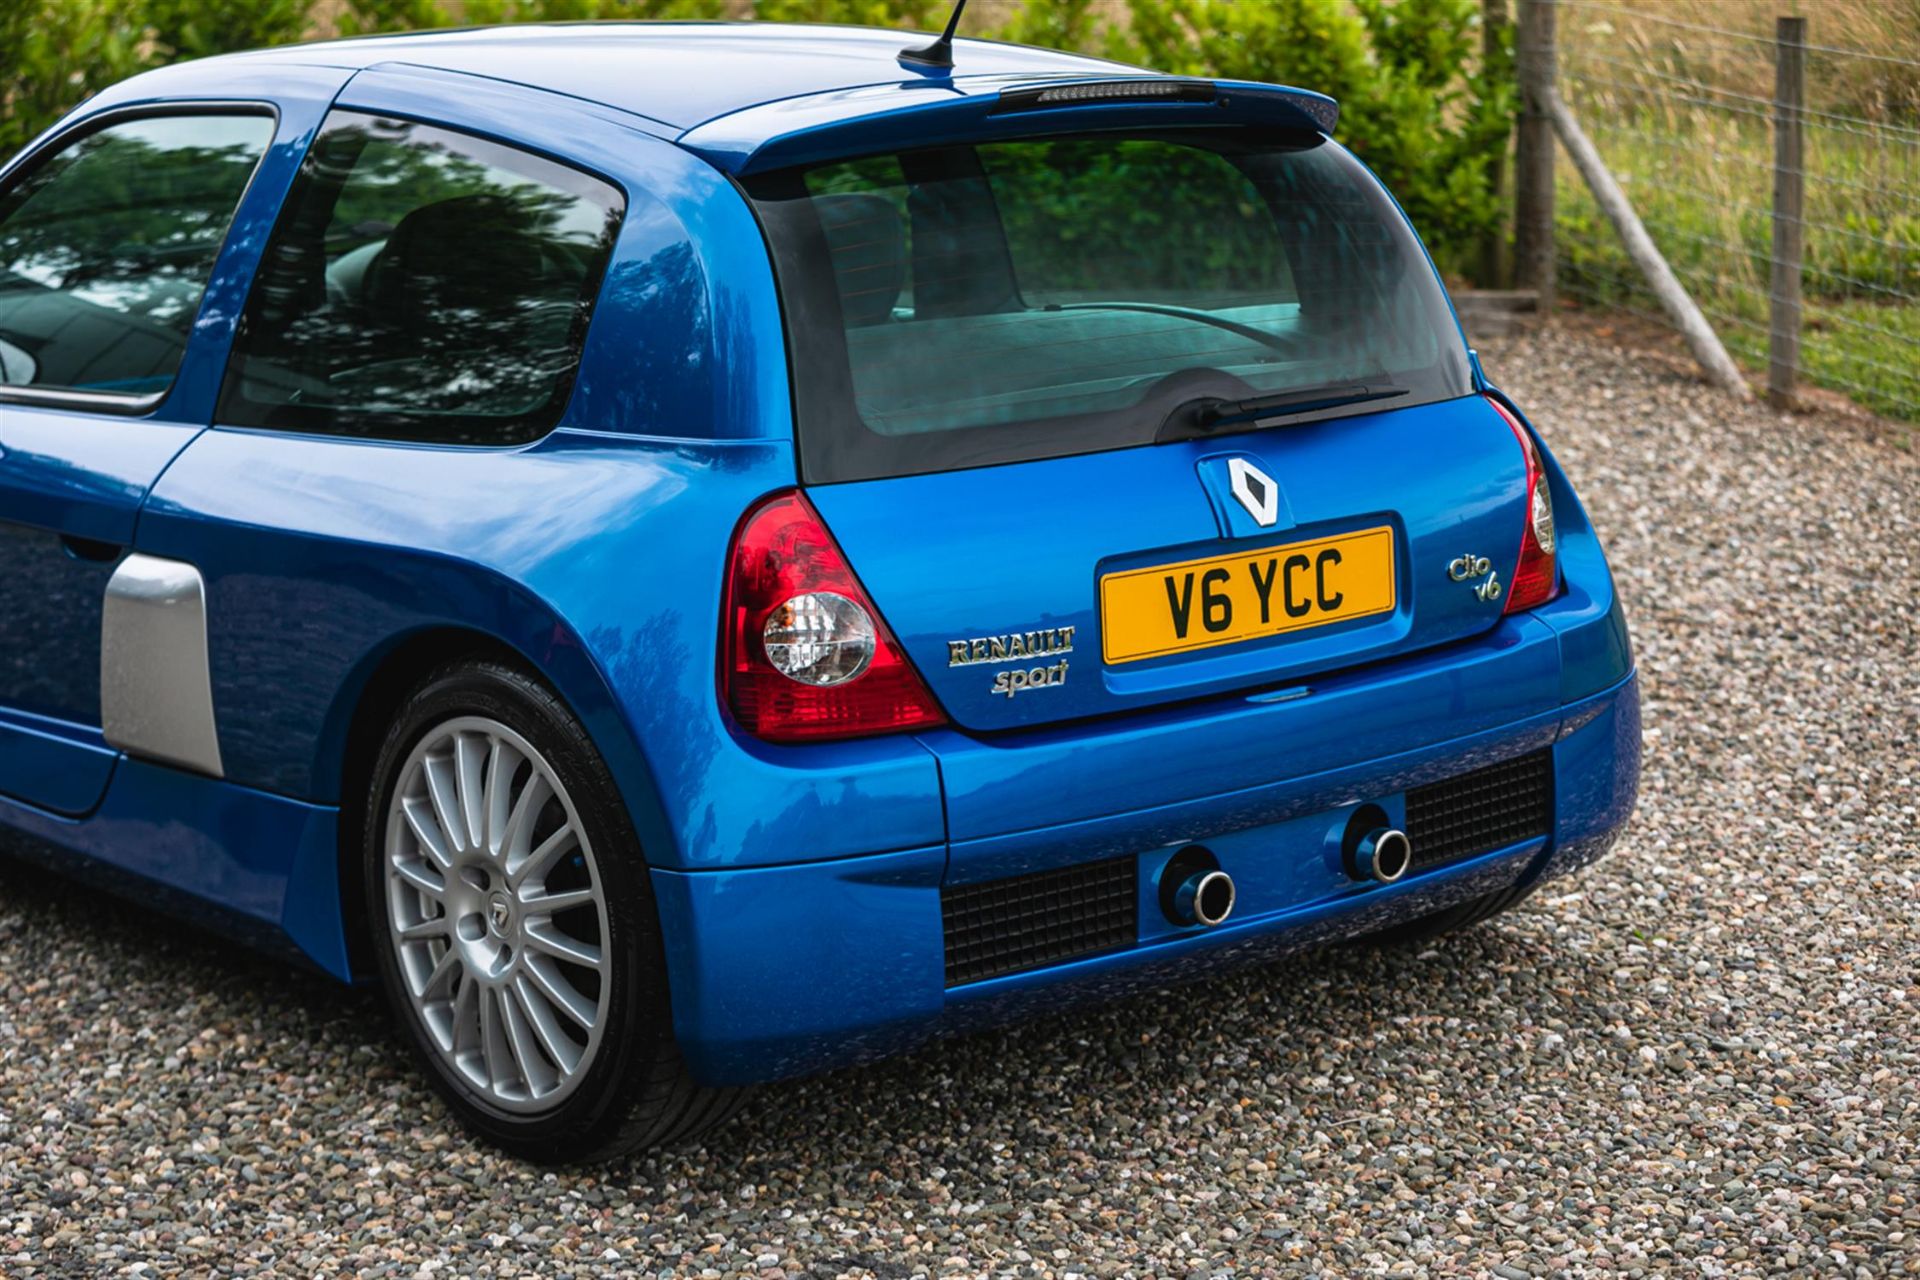 2003 Renault Clio V6 RenaultSport (255) Phase 2 - Image 9 of 10